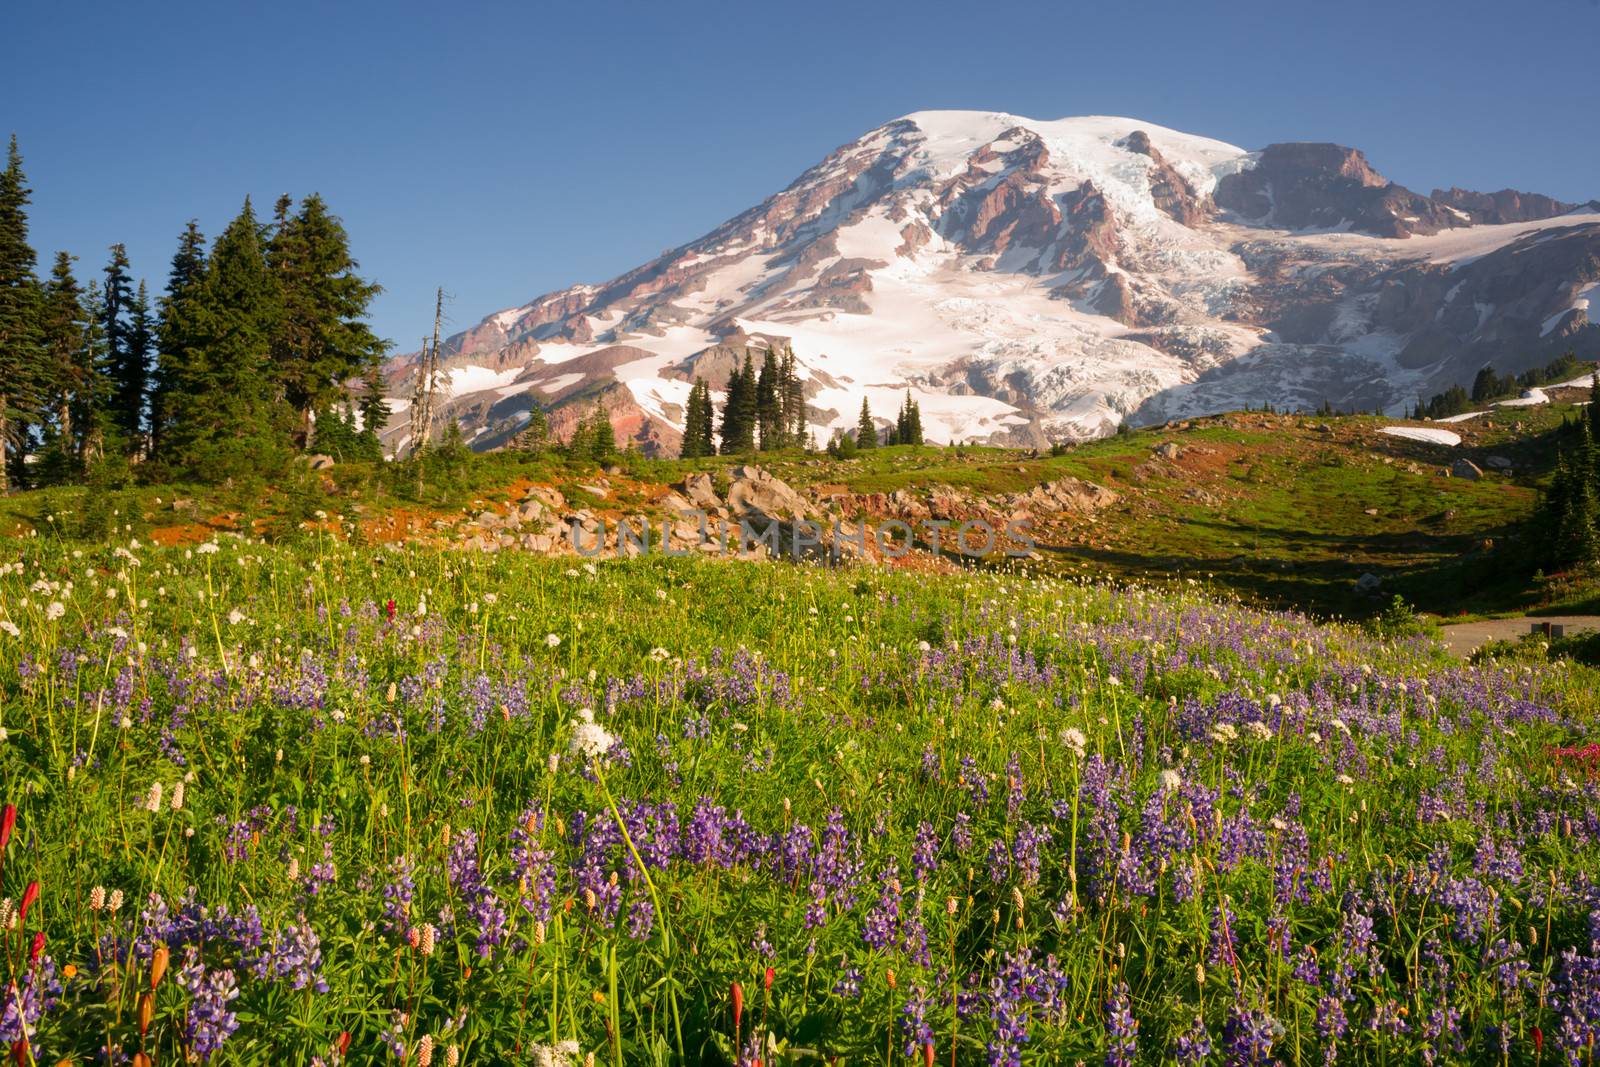 A dramatica and colorful view of Mt. Rainier with wildflowers in full bloom